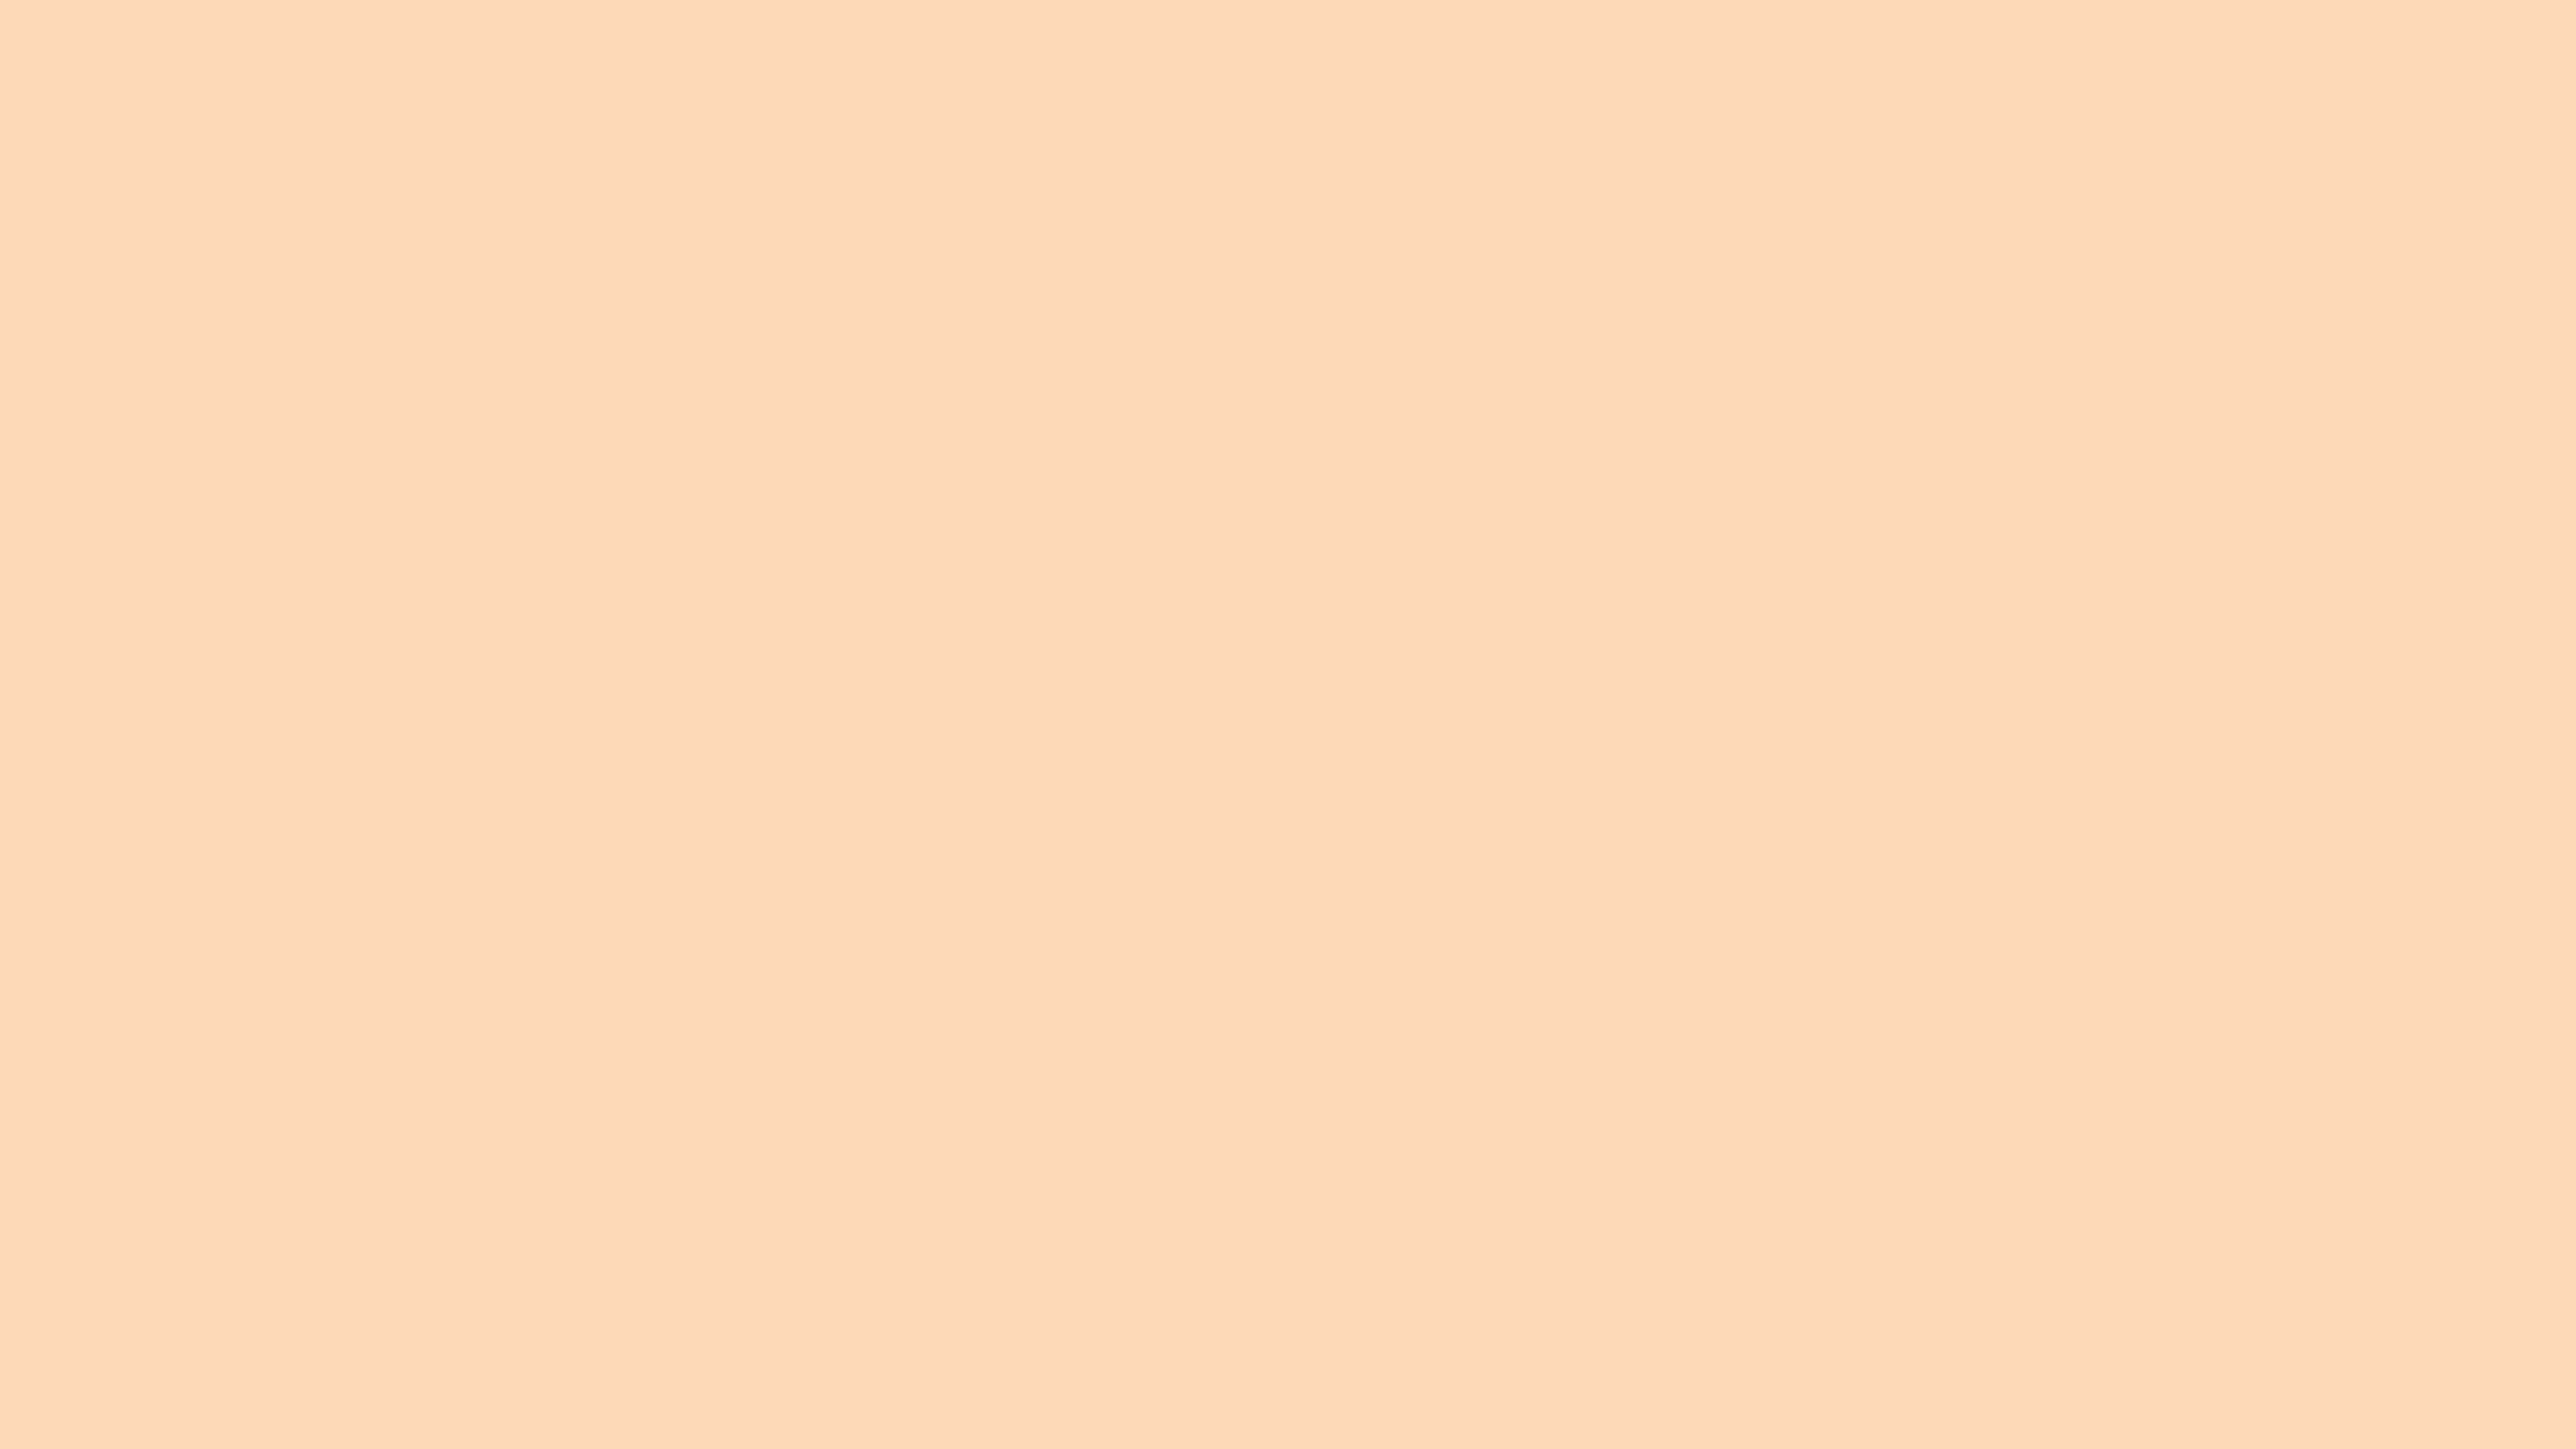 3840x2160 Peach Puff Solid Color Background 3840x2160